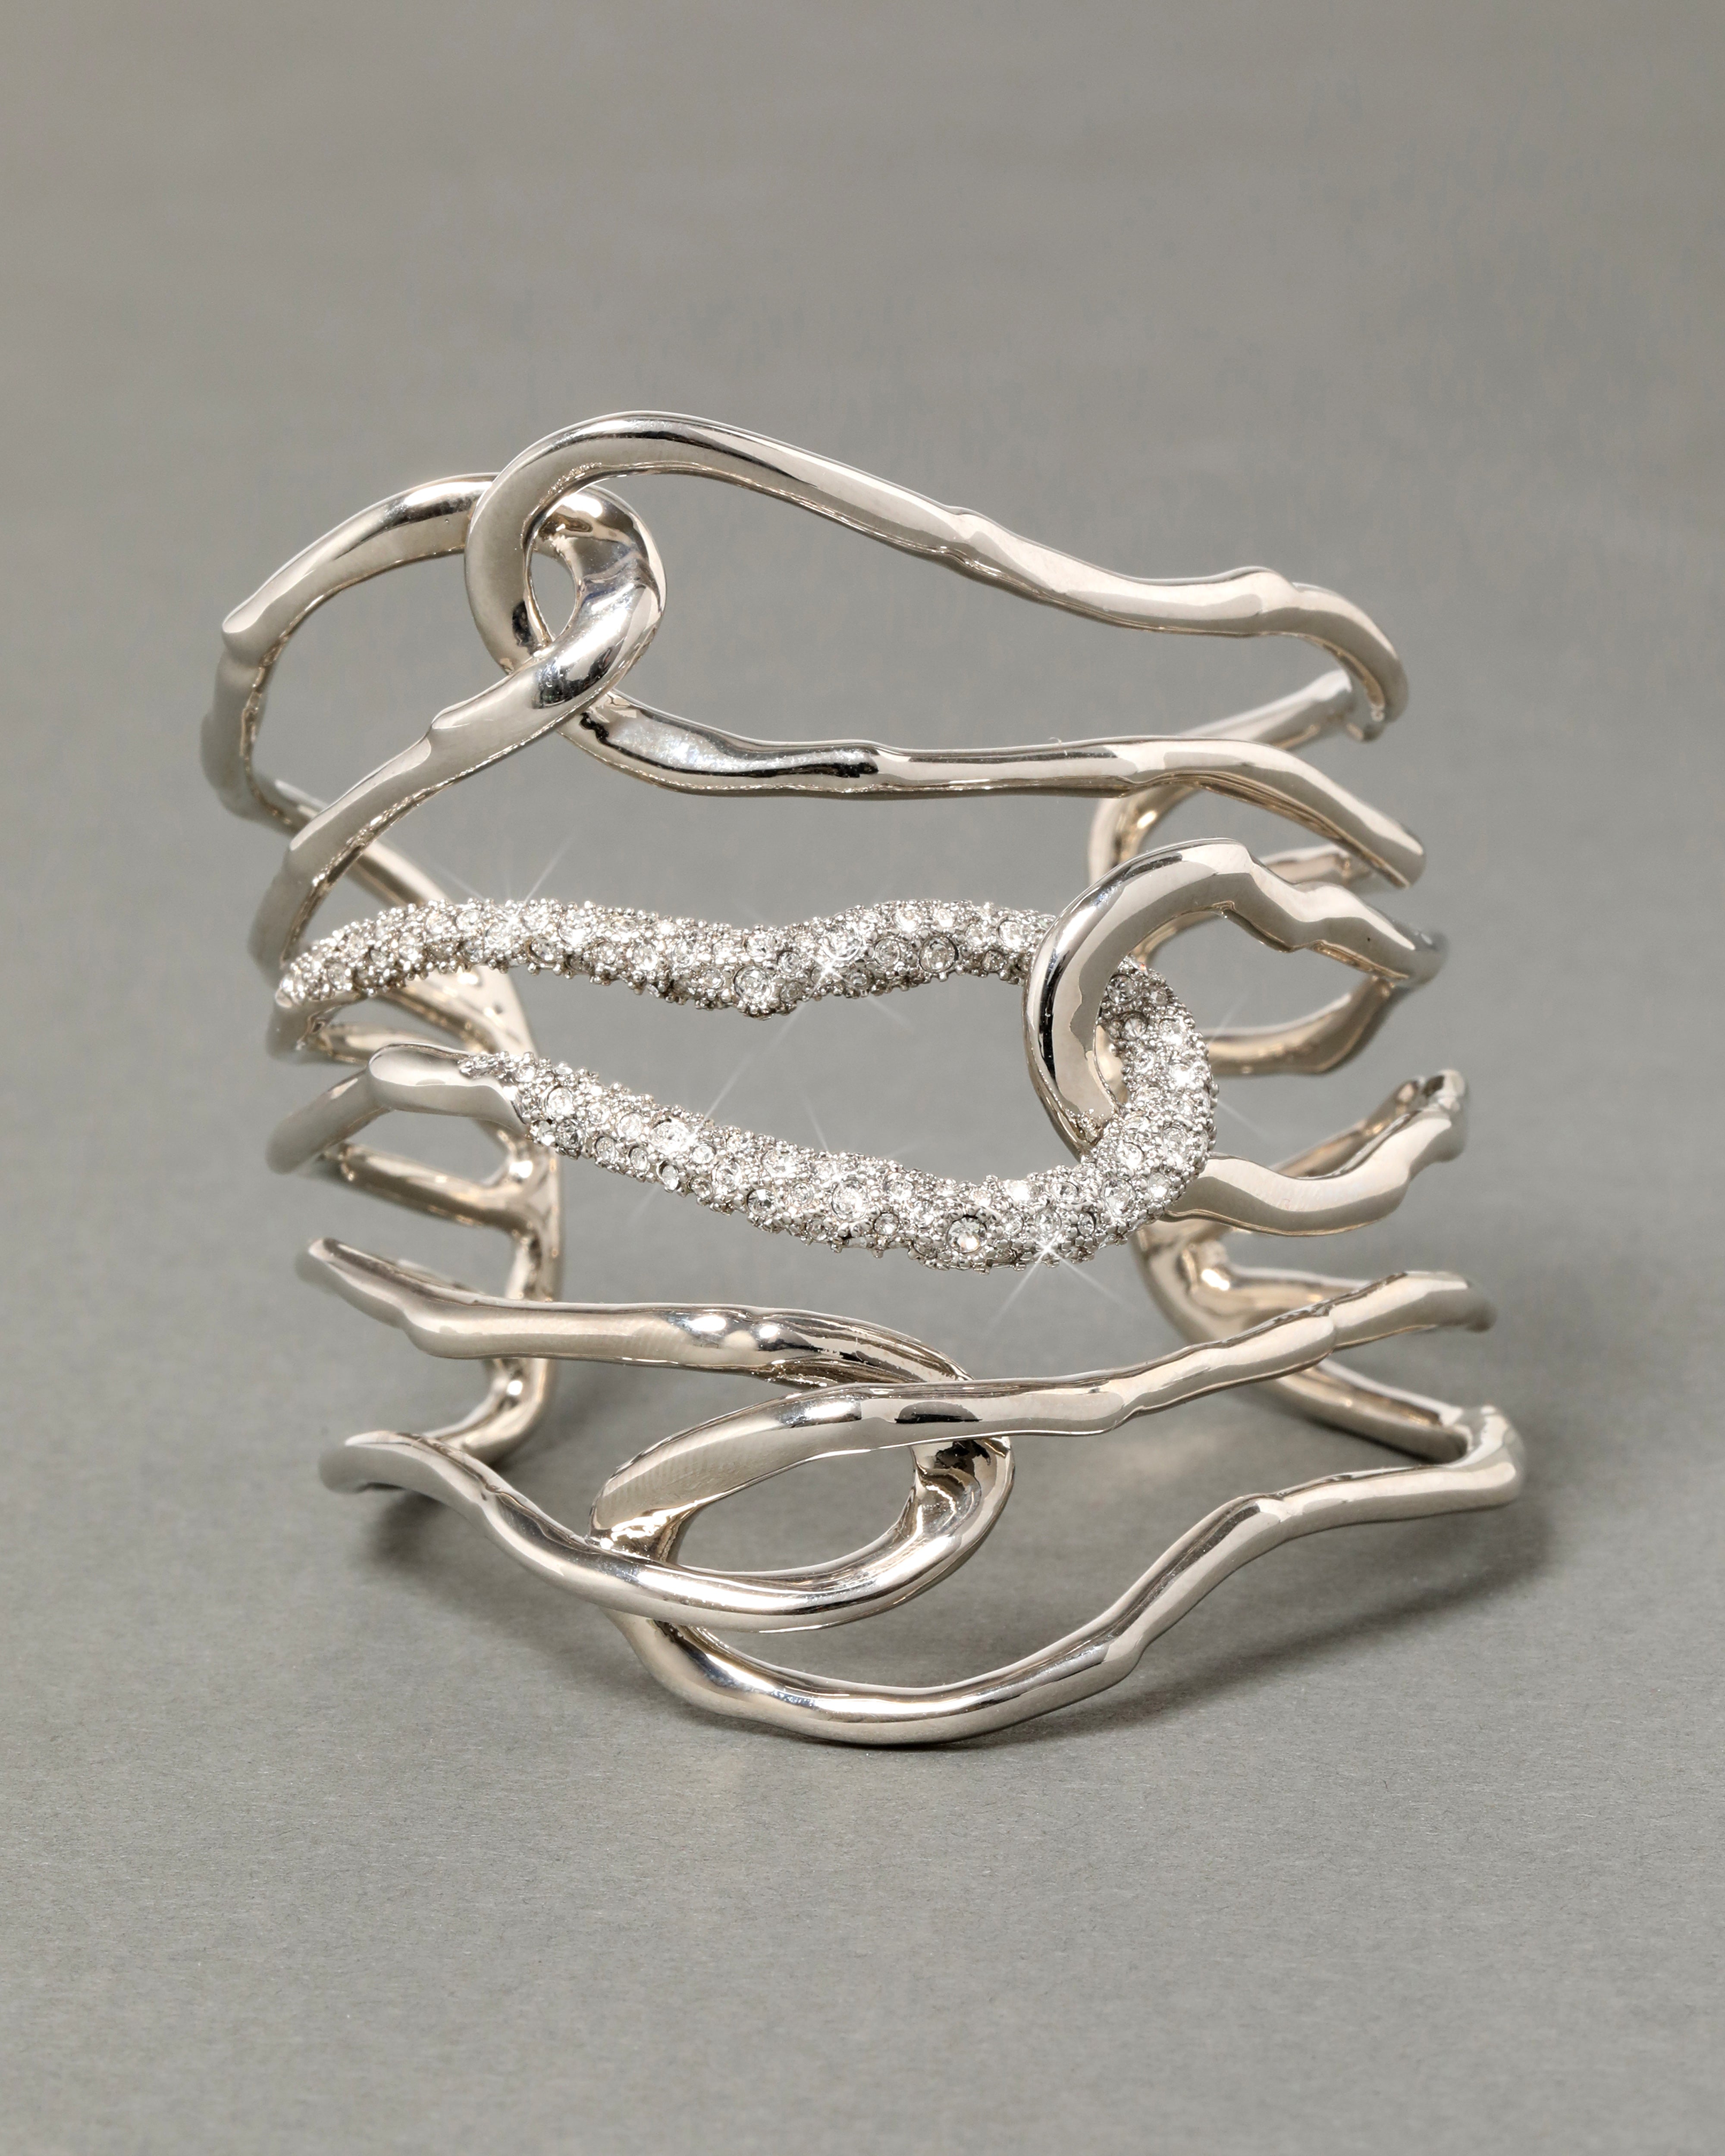 Solanales Large Twisted Cuff Bracelet - Silver